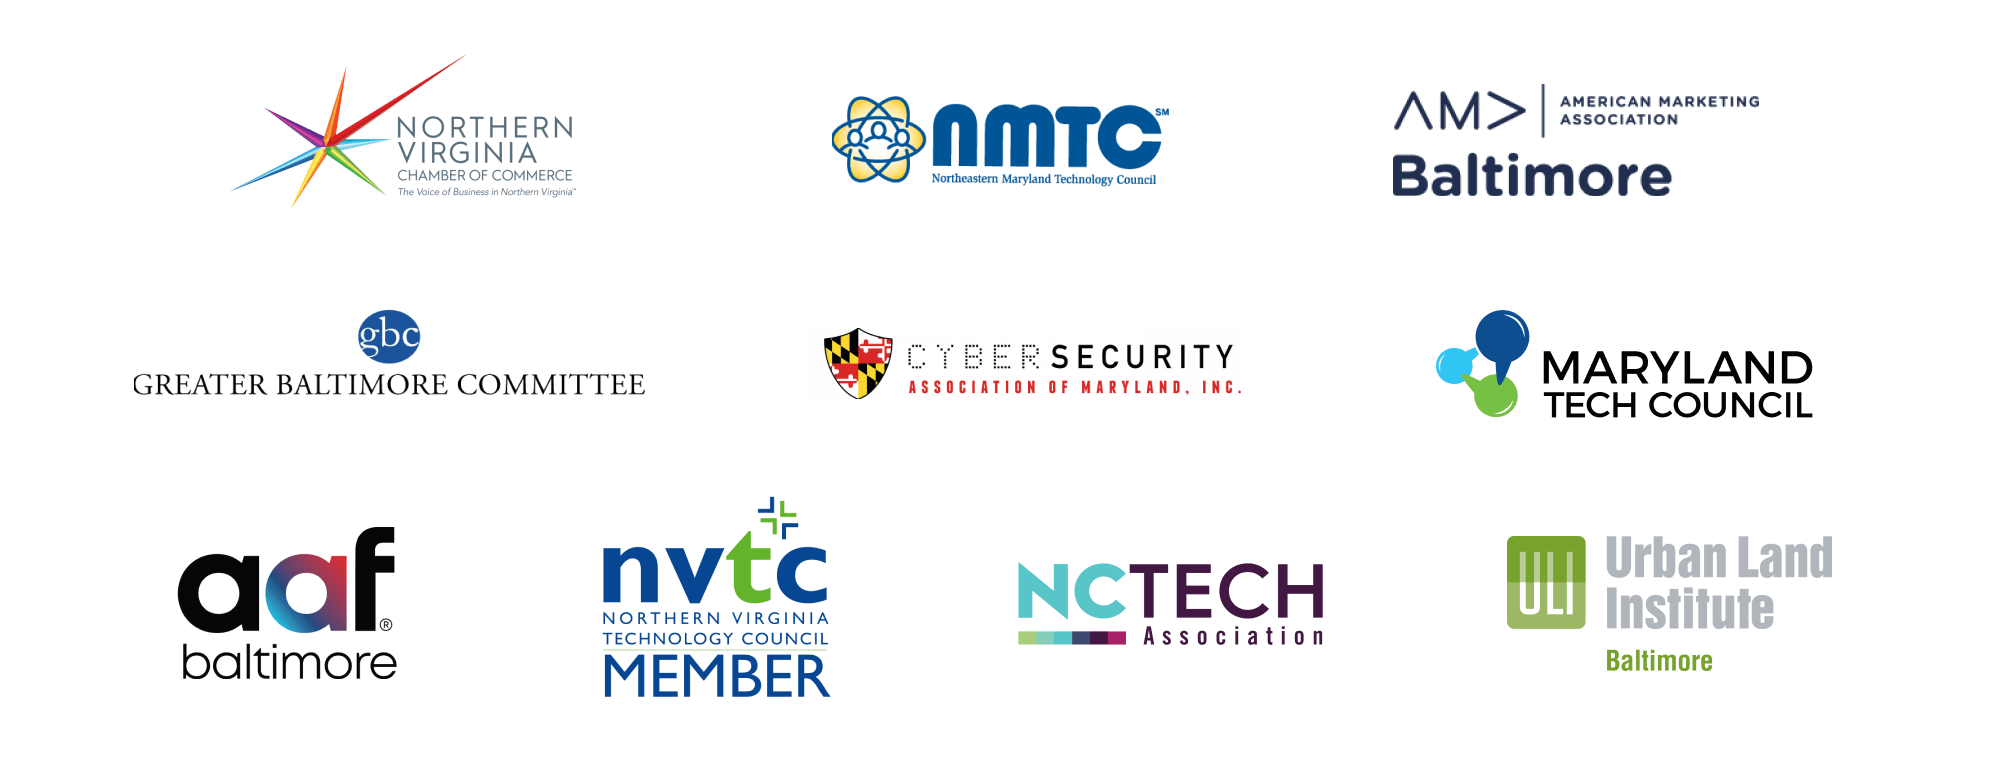 Nothern Virginia Chamber of Commerce, Northeastern Maryland Technology Council, American Marketing Association Baltimore, Greater Baltimore Committee, CyberSecurity Association of Maryland, Maryland Tech Council, AAF Baltimore, NVTC Member, NCTech Association, Urban Land Institute Baltimore